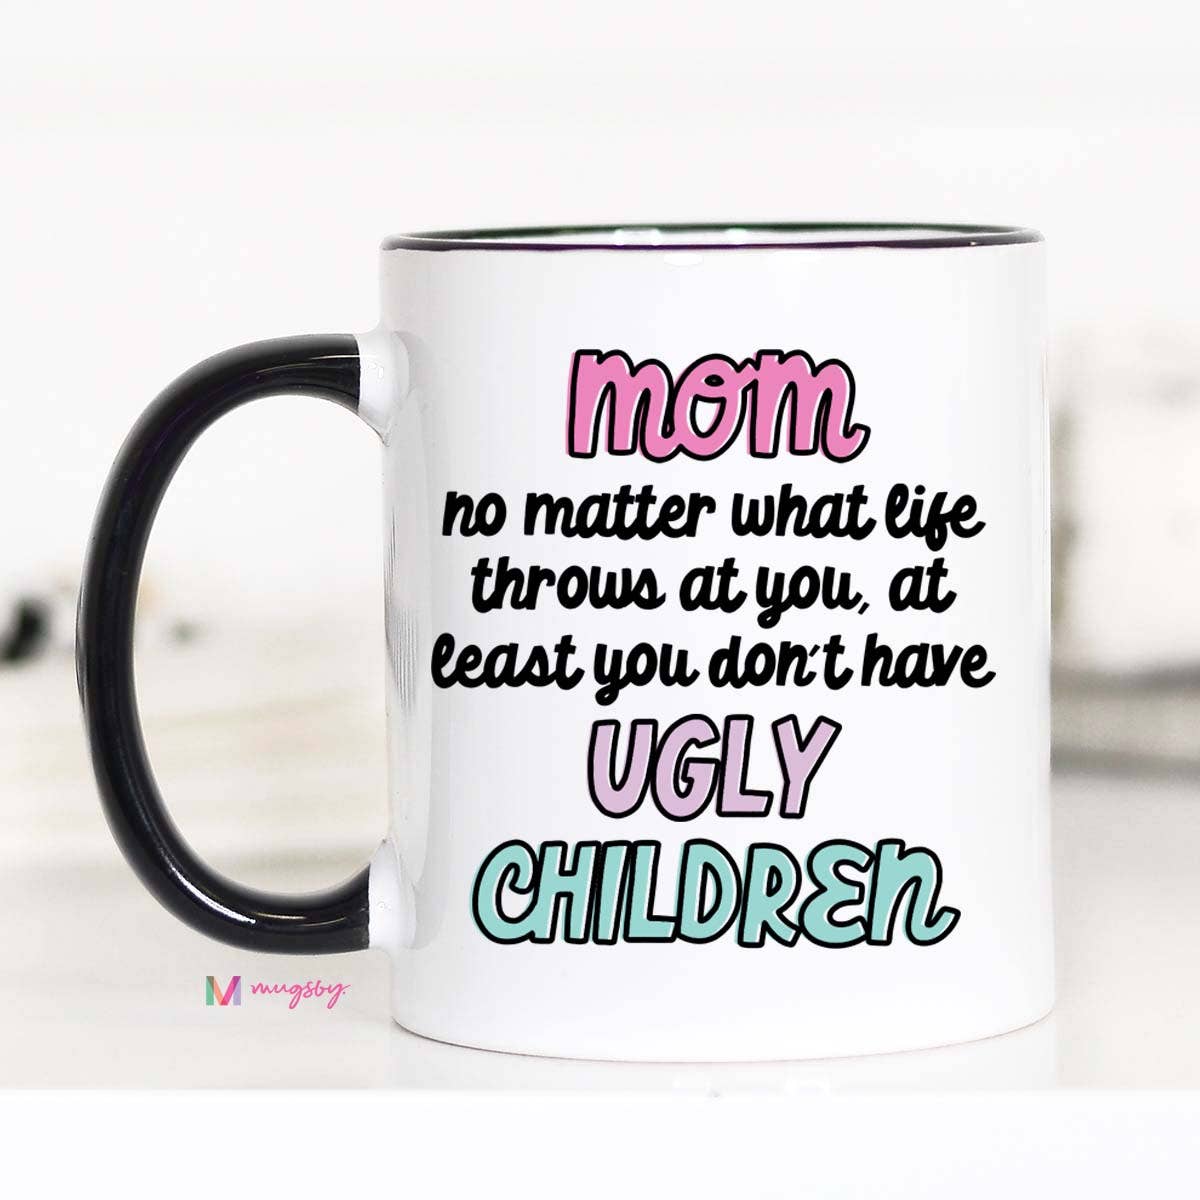 Mom At Least You Don't Have Ugly Children Coffee Mug: 15oz